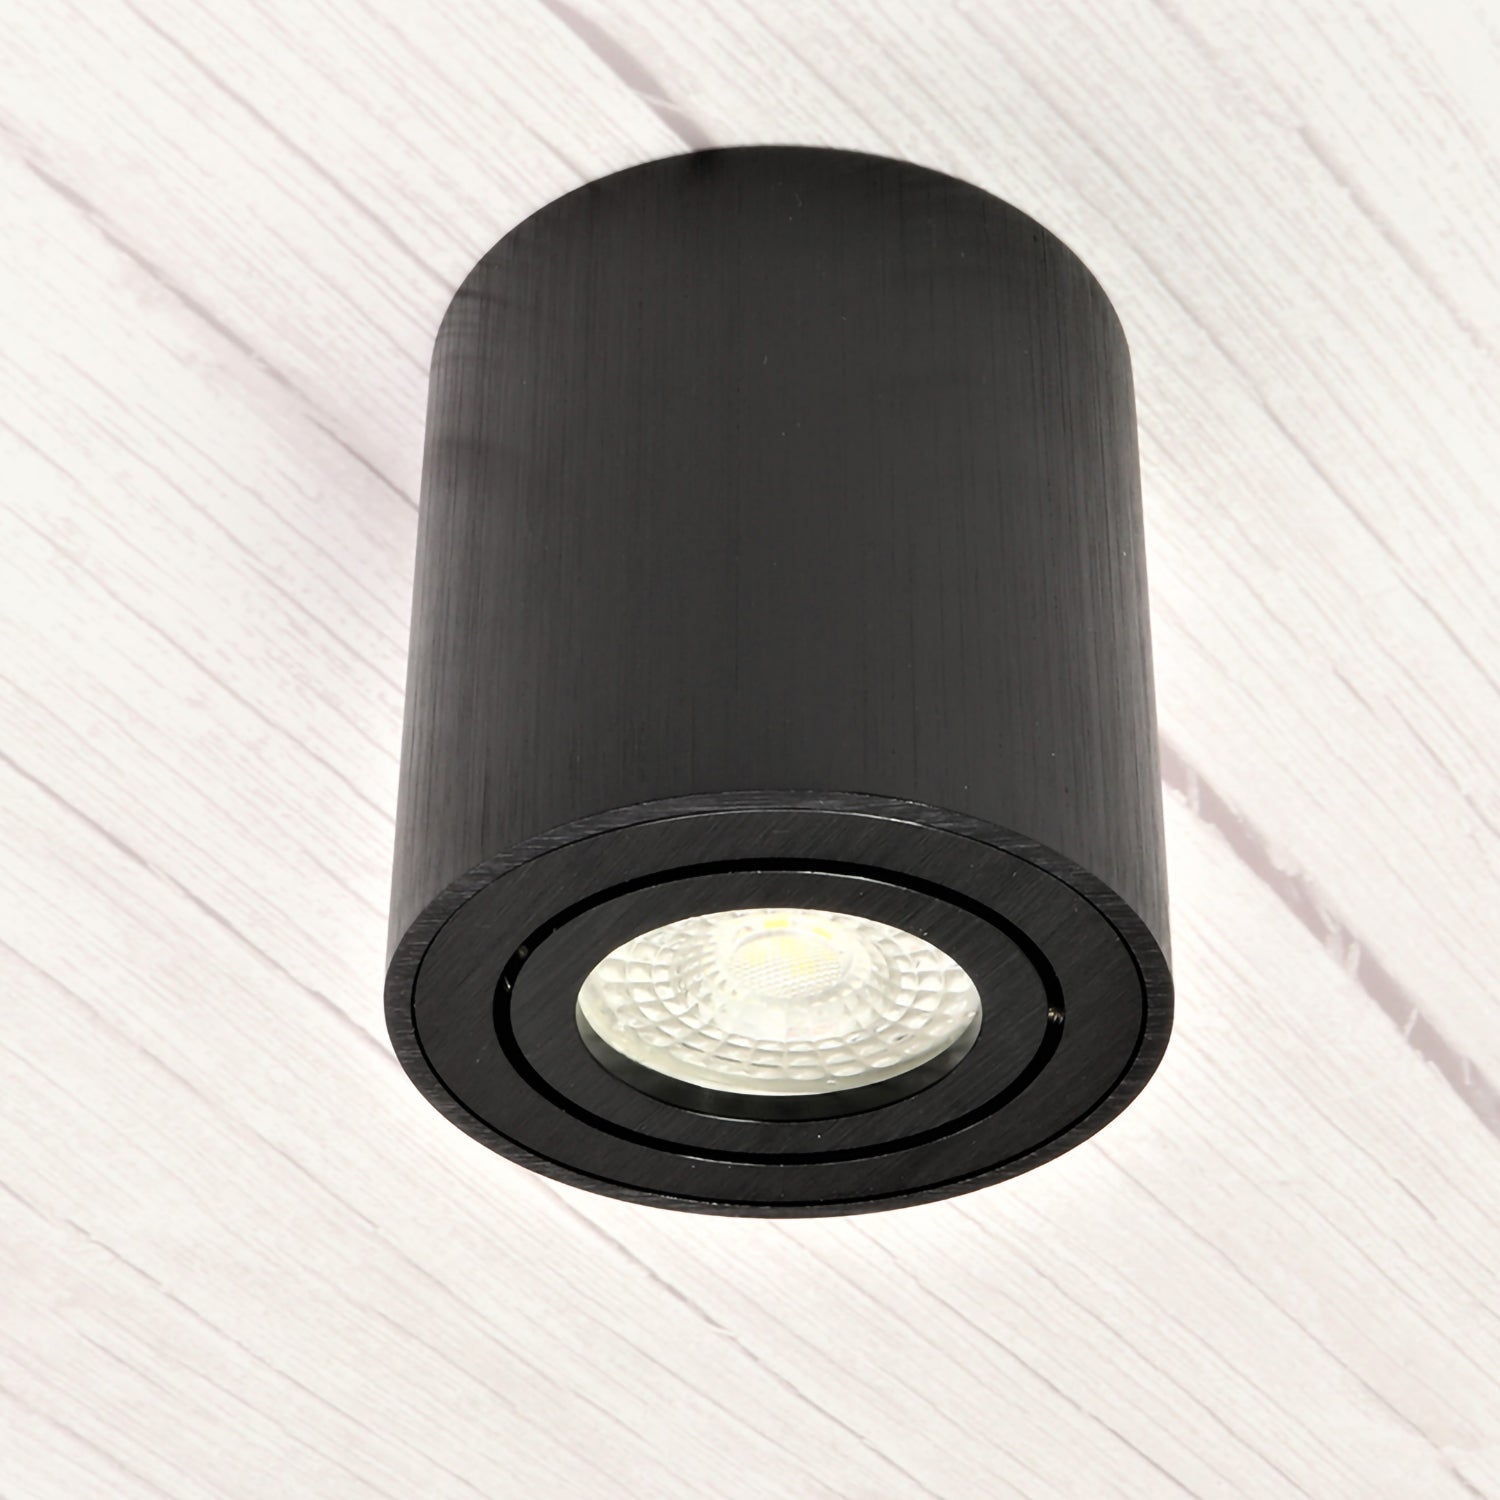 Dimmable Black – novoom surface-mounted light ceiling Milano spotlight 230V GU10 Surface-mounted LED light Round 6.2W